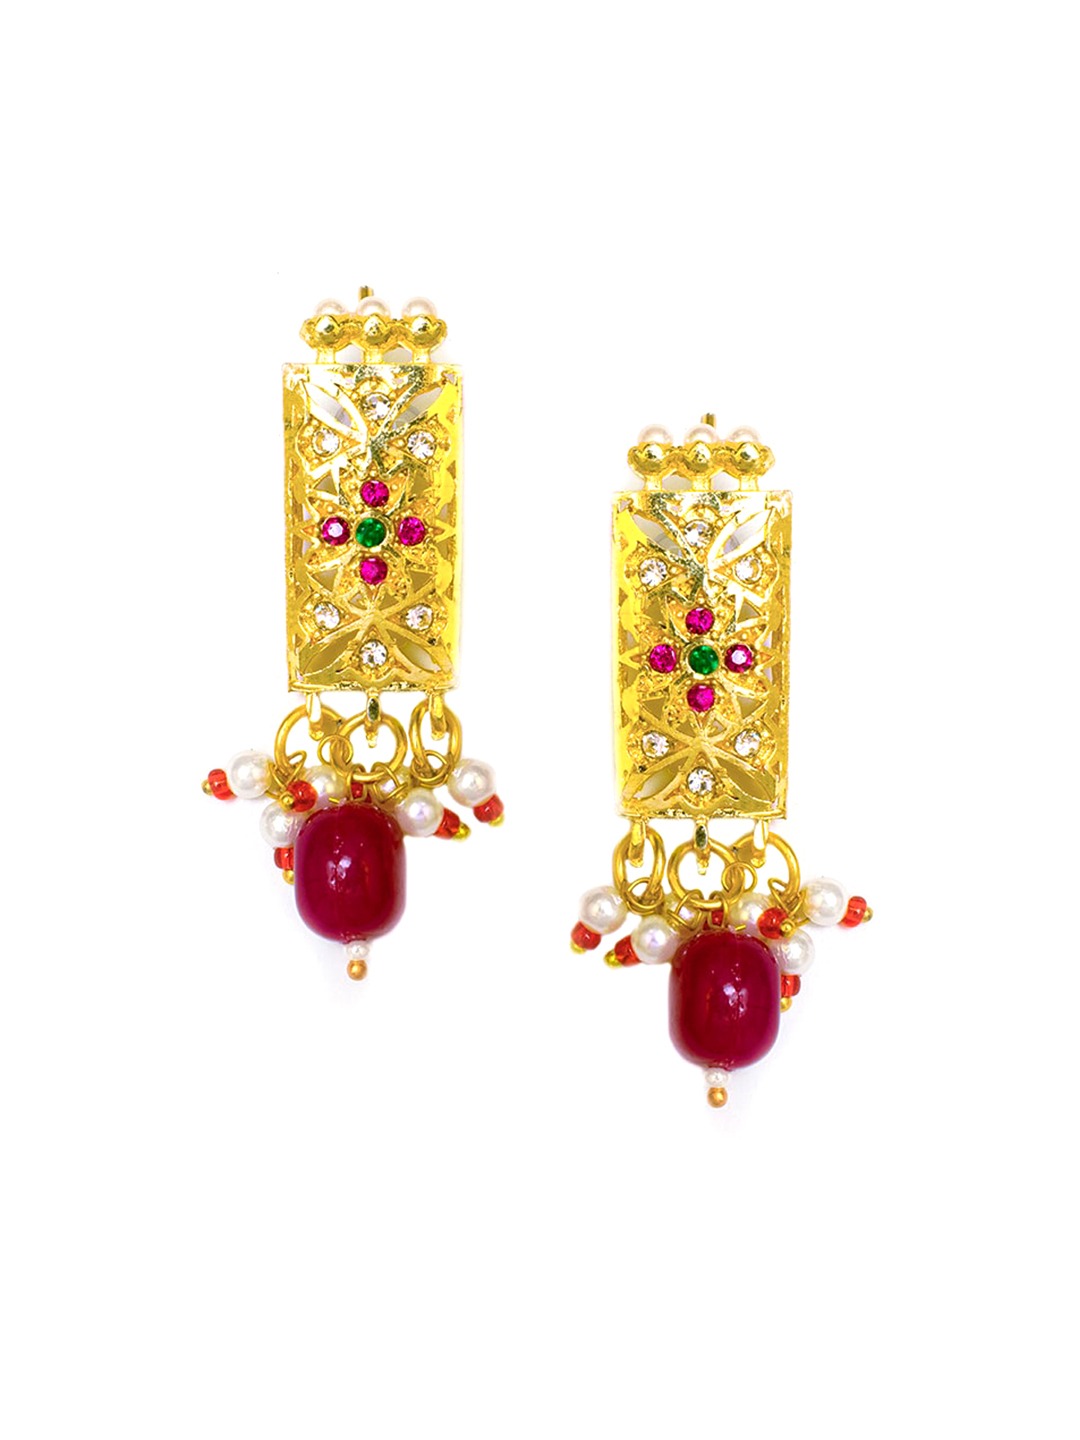 Women's Gold-Plated Pink & White Stone-Studded & Beaded Jewellery Set - Morkanth